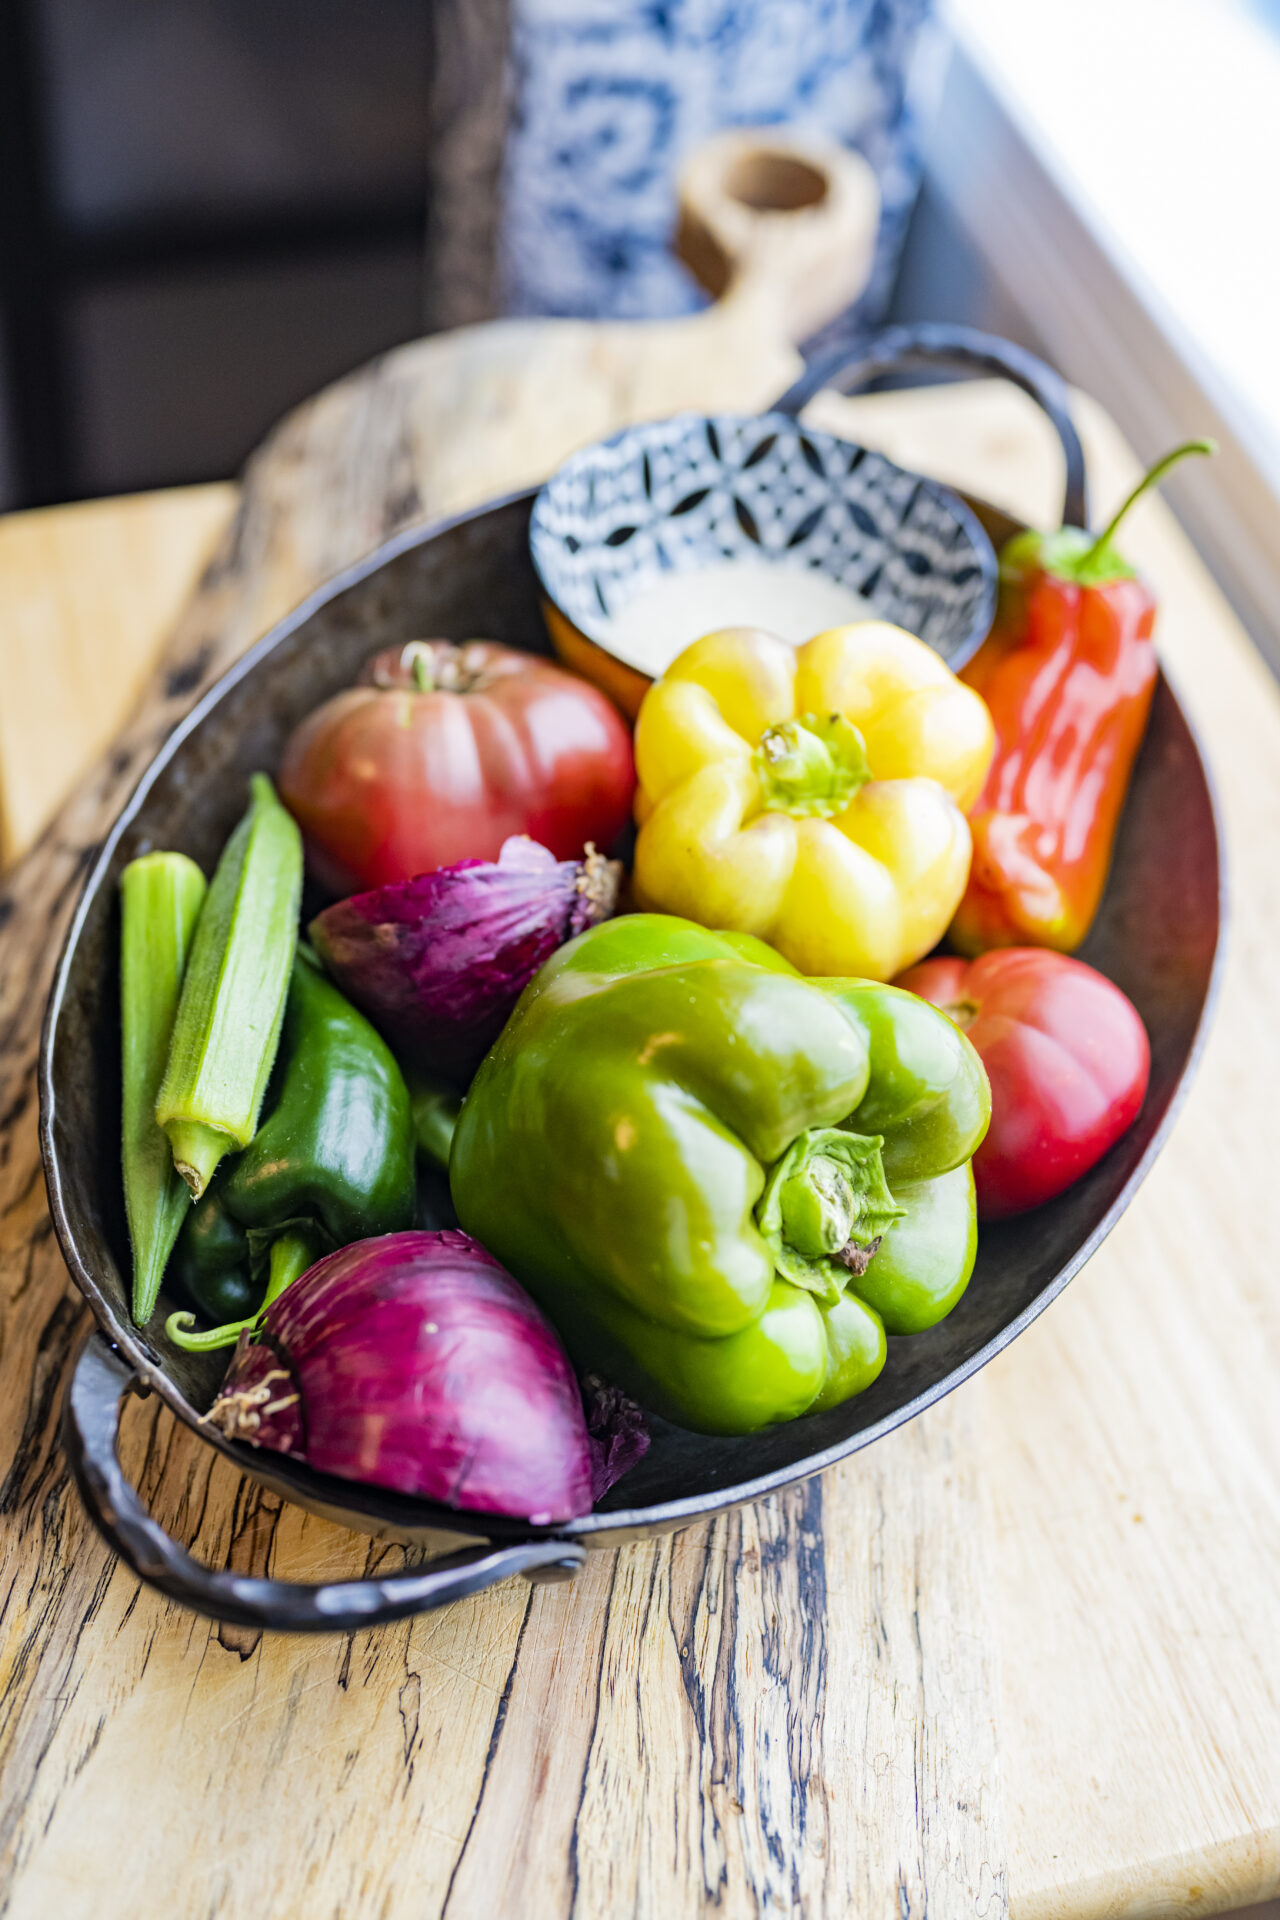 Dish storing fresh vegetables, like bell peppers, okra, red onion, and tomato.